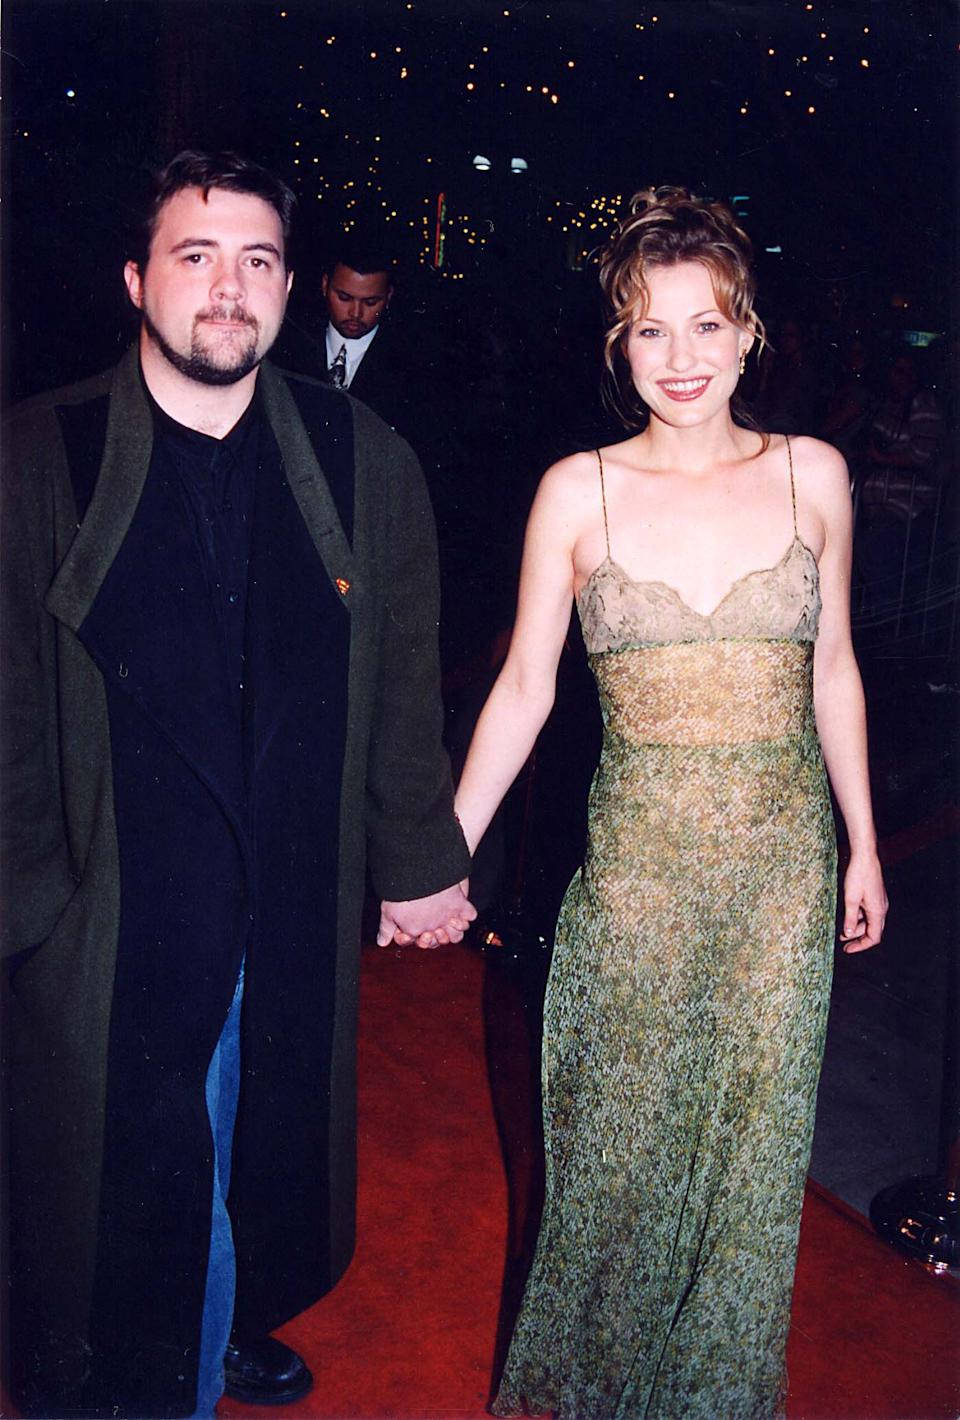 Joey Lauren Adams And Kevin Smith Chasing Army Premiere Wallpaper